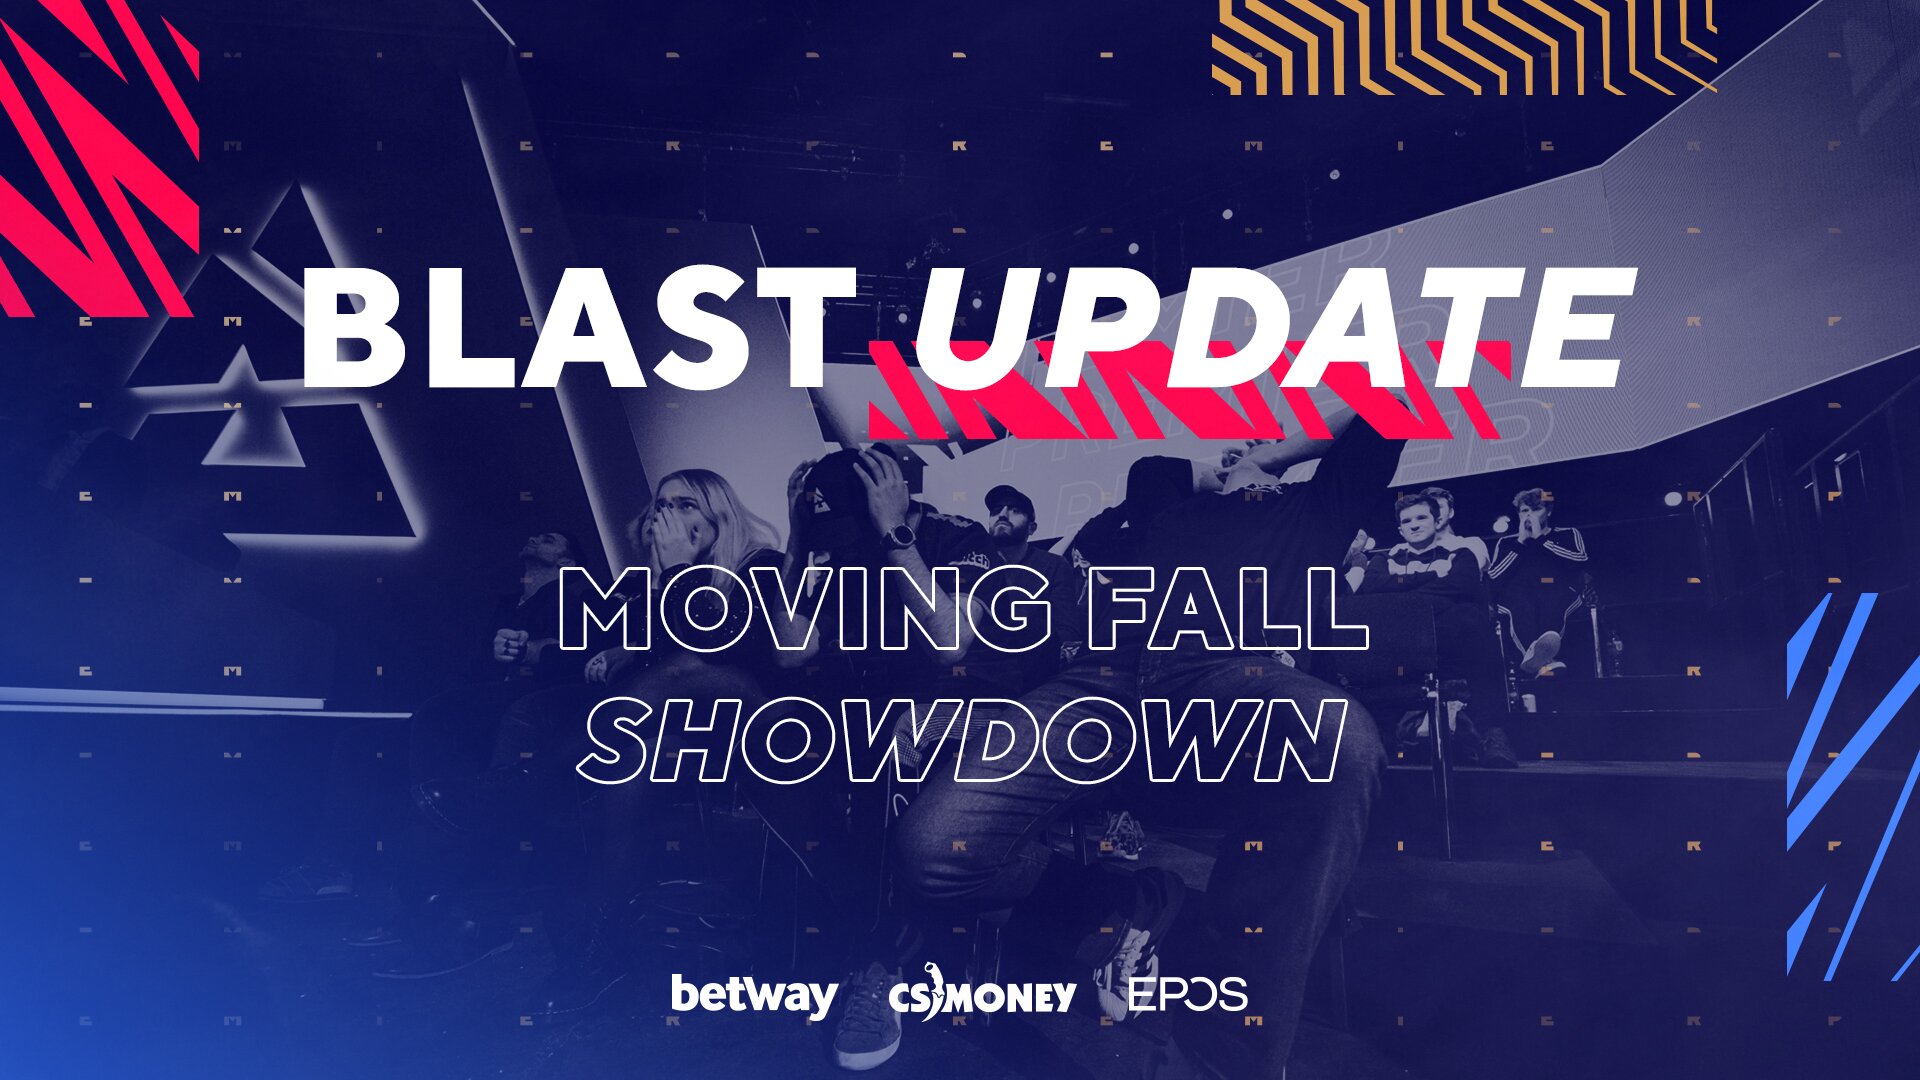 BLAST Premier changed the dates for the Fall Showdown to avoid conflicts with the recently rescheduled ESL One: Rio Major (Image via BLAST)